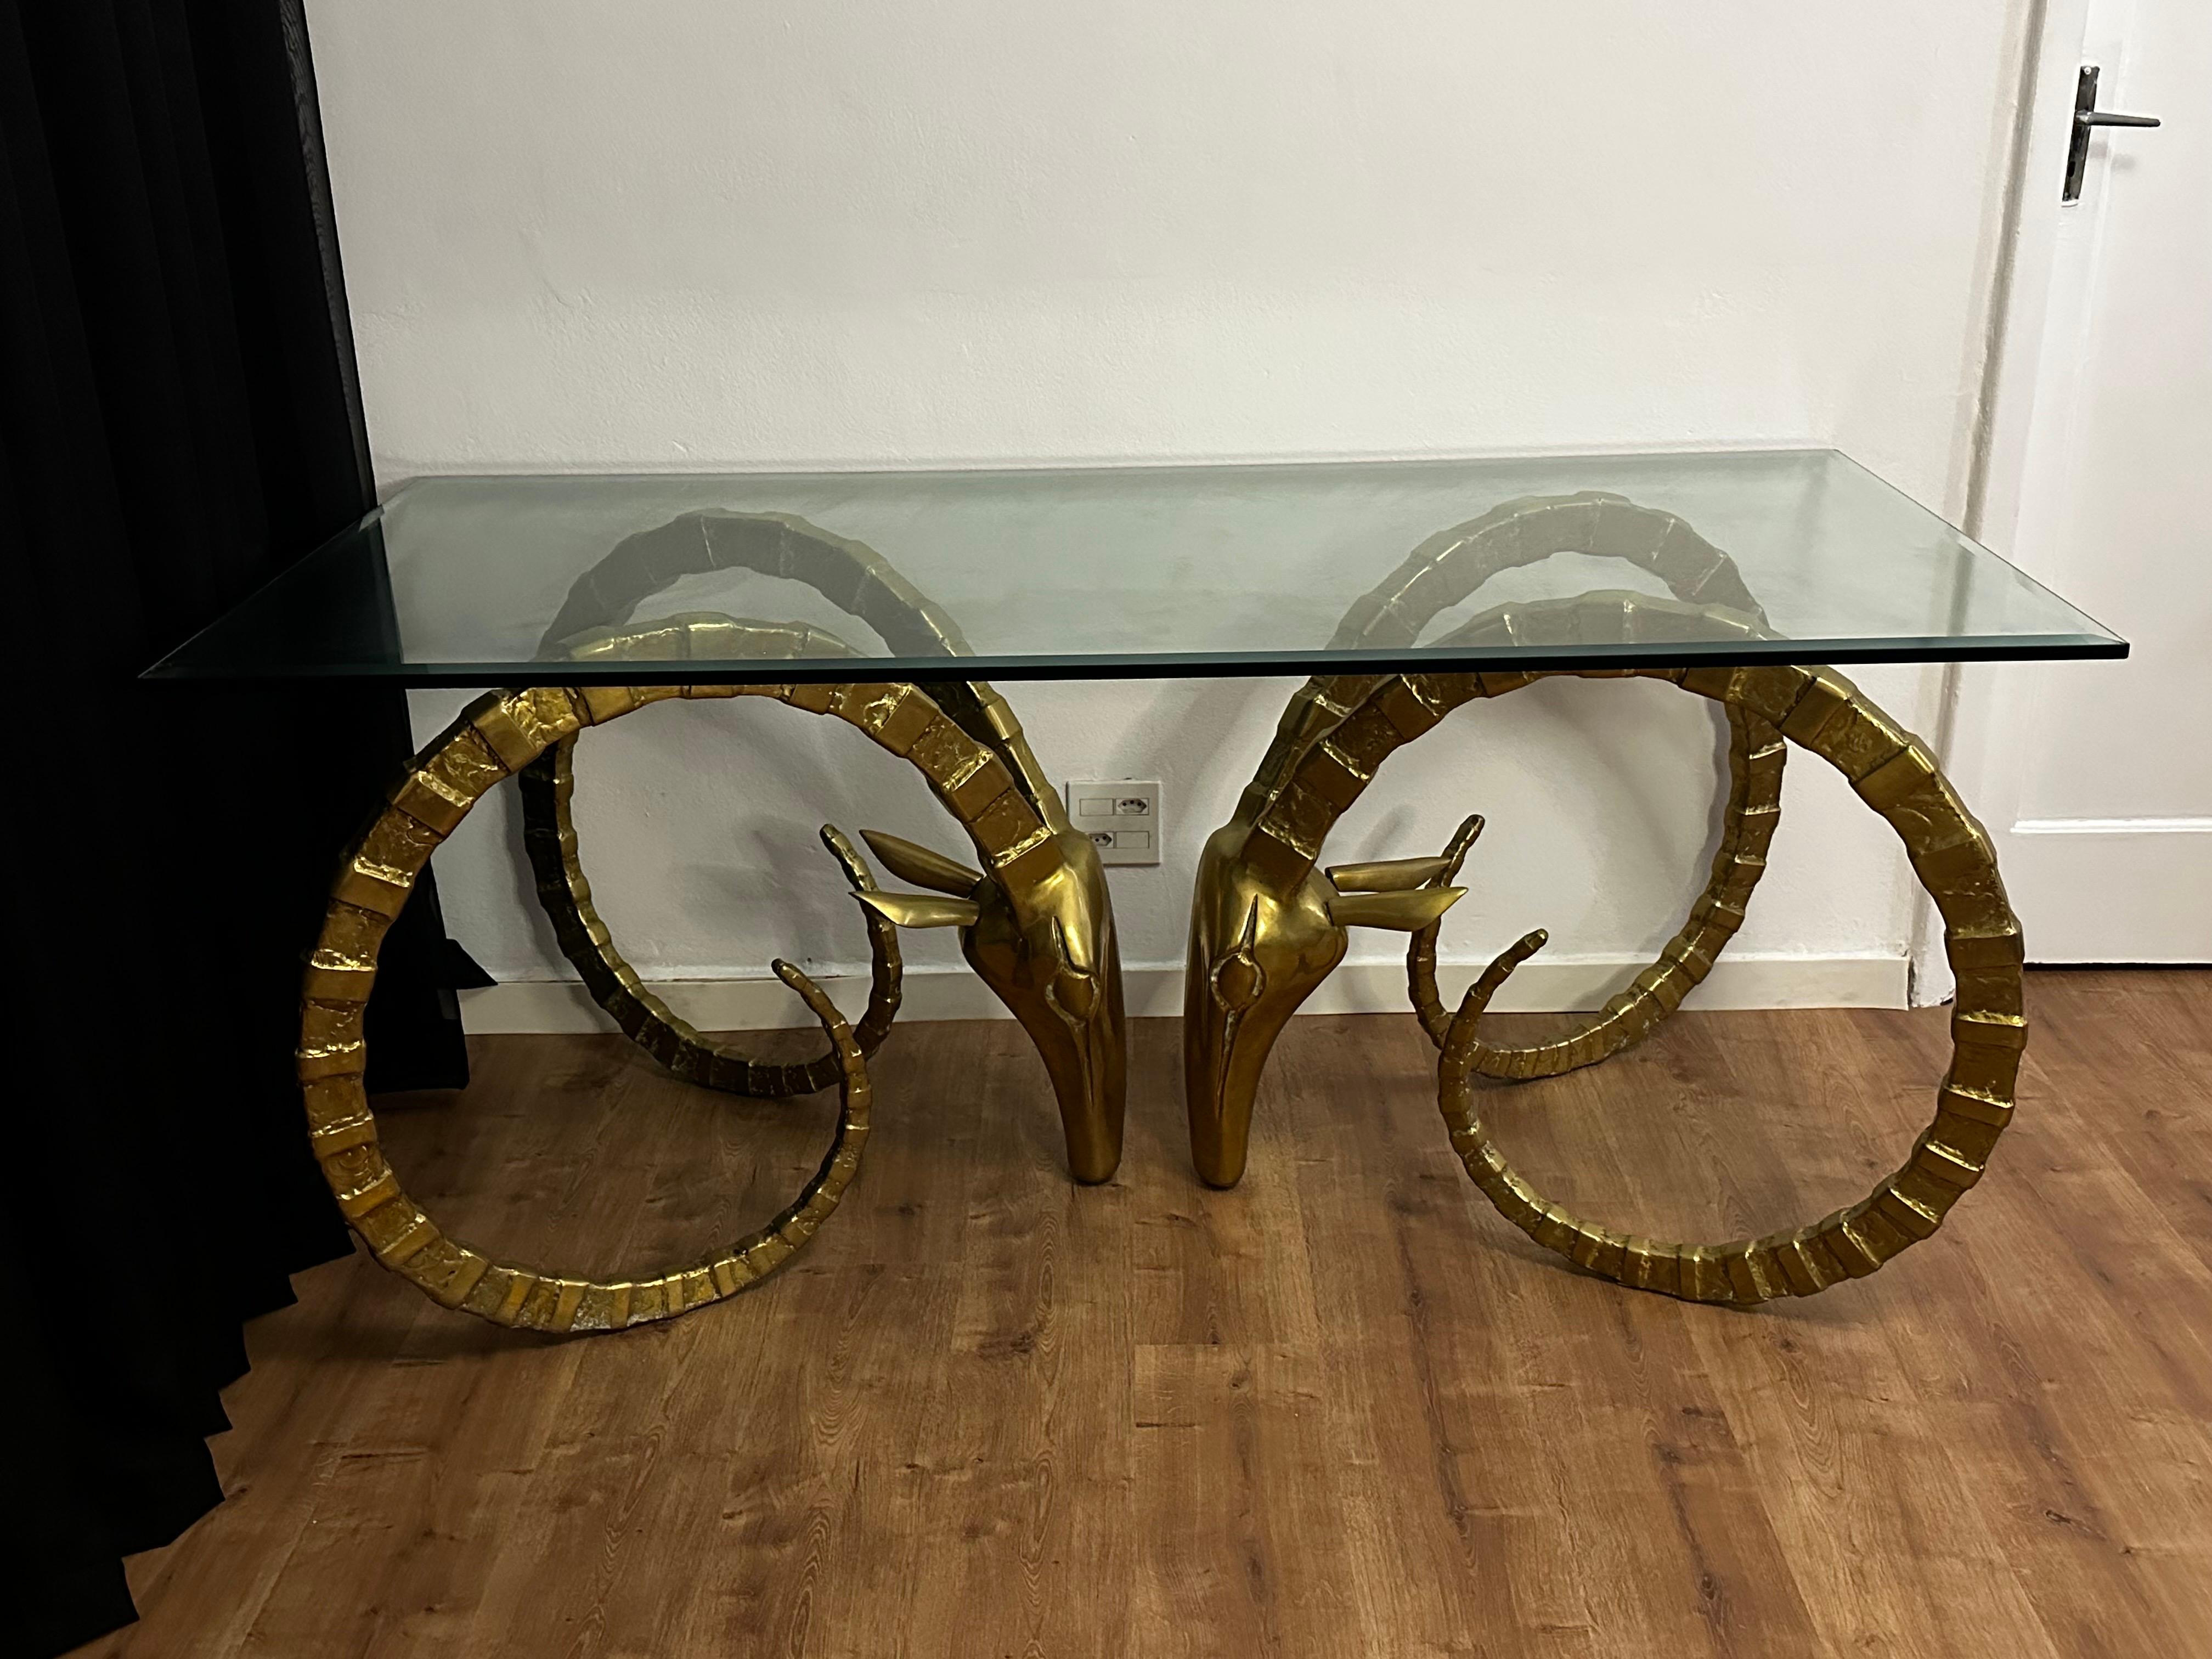 Alain Chervet mid-century modern style glass dining or center table with a pair of brass rams head bases.